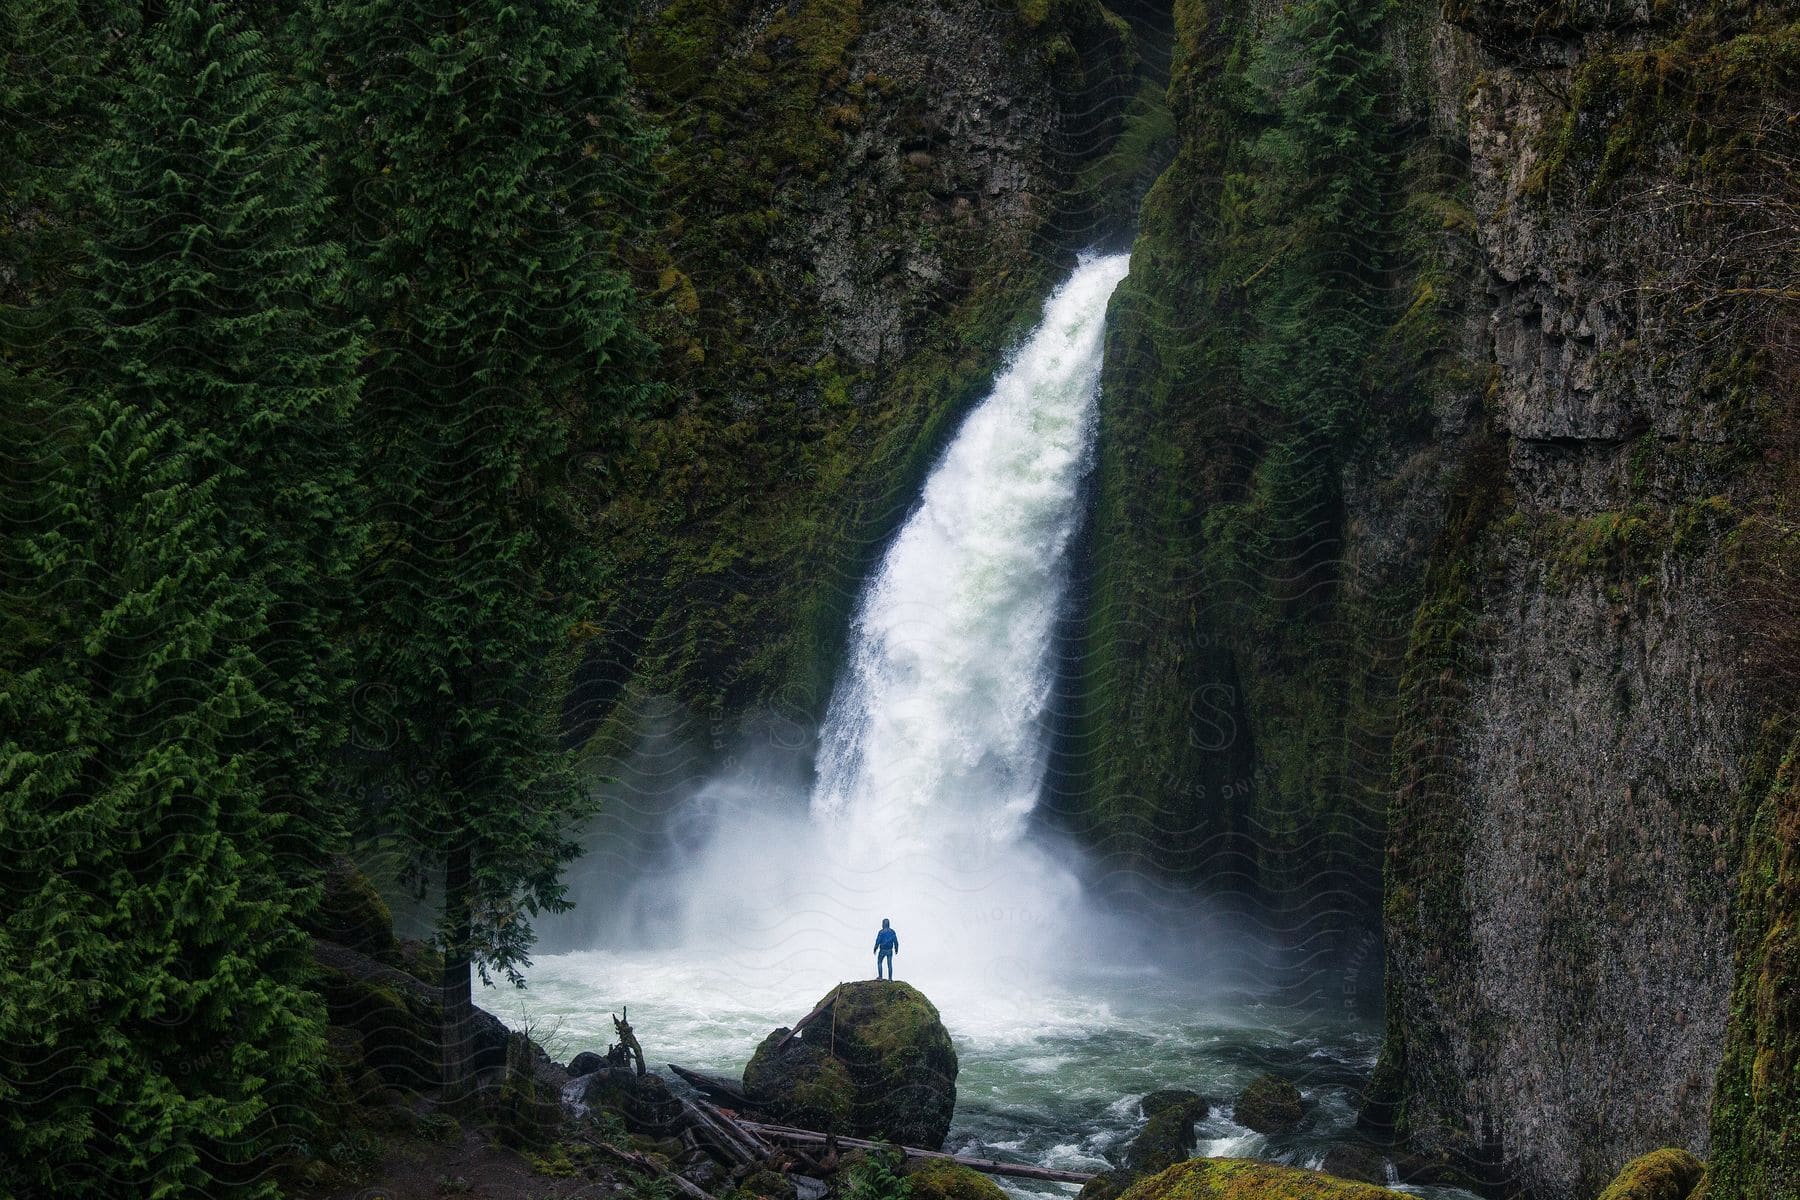 A person stands on top of a large boulder in front of a rushing waterfall.